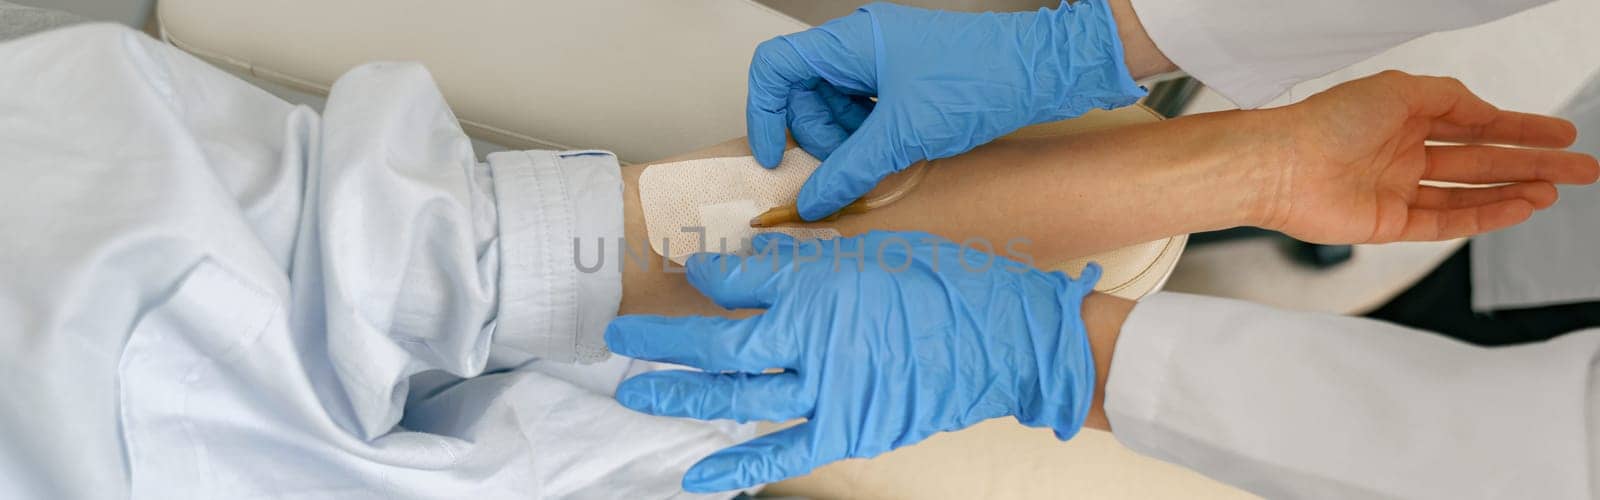 Close-up of doctor putting an IV drip to patient intravenously in hospital ward. High quality photo